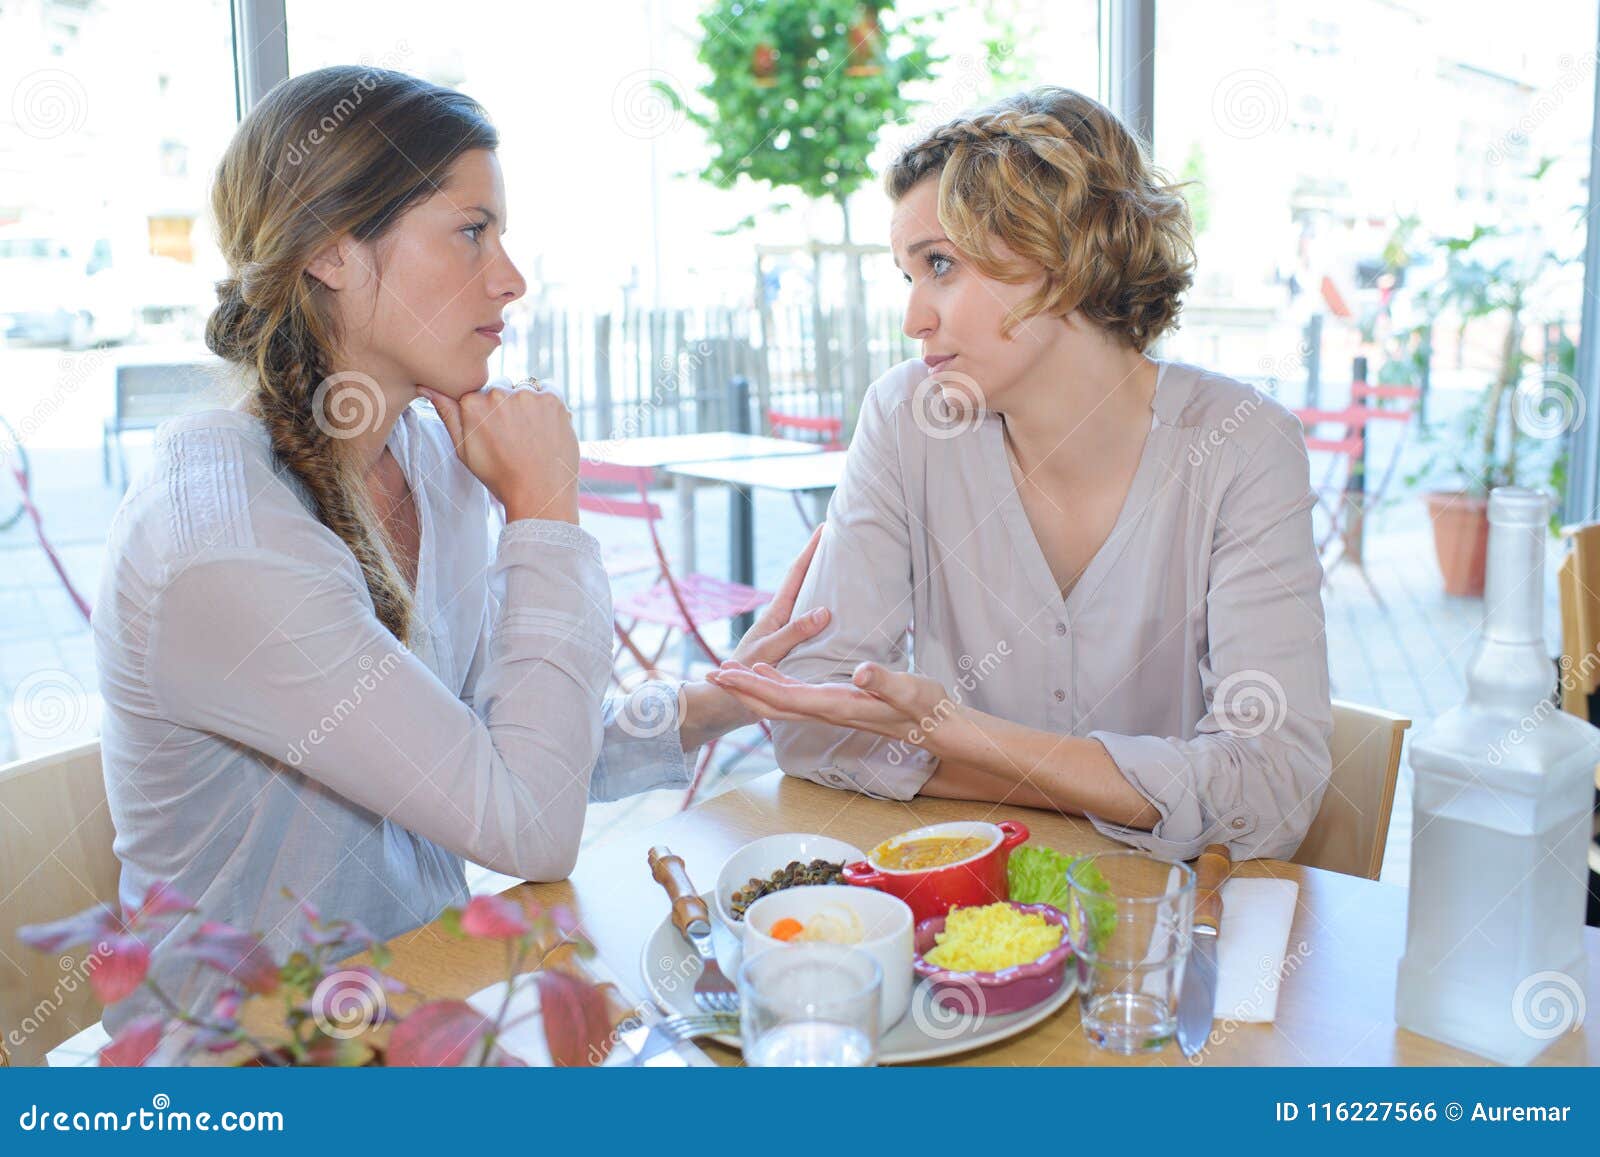 woman comforting friend in cafe